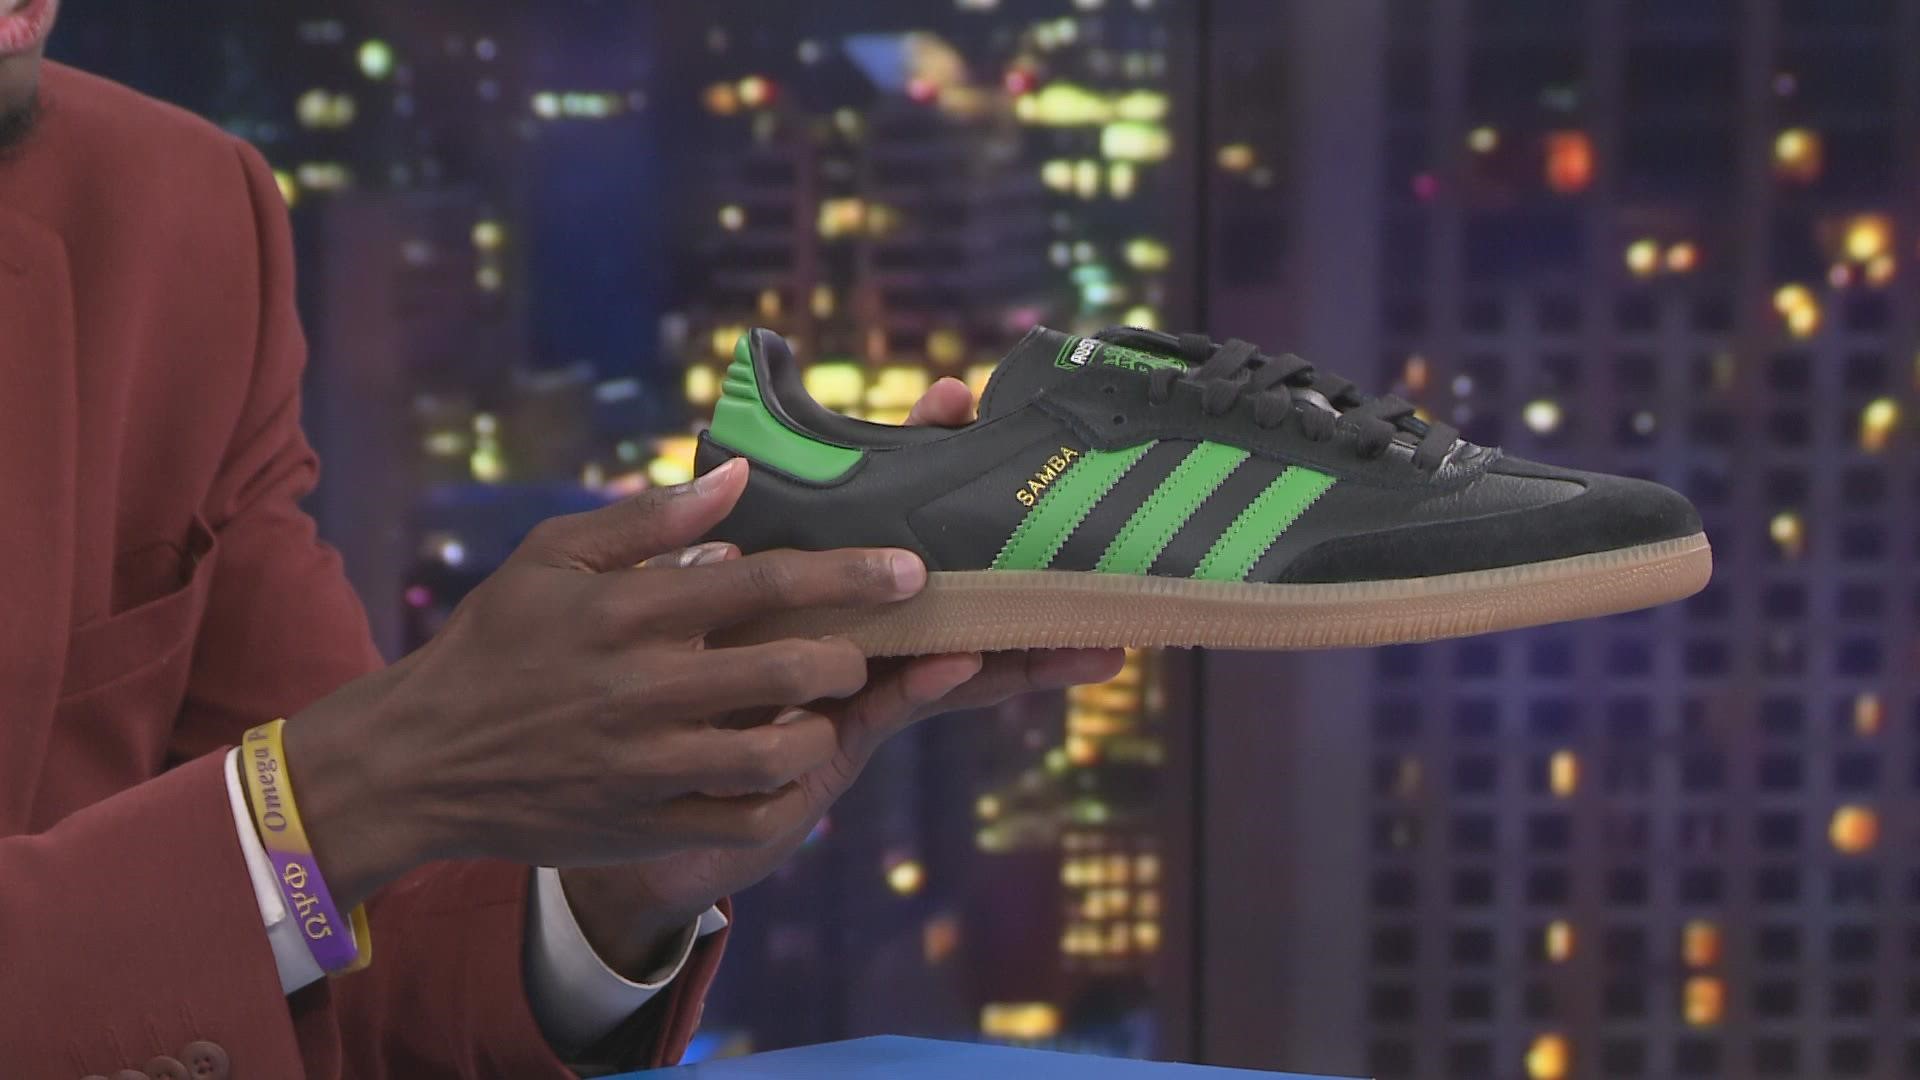 The Austin FC and Adidas Samba collaboration features one of the brand's iconic shoe styles in green and black, the soccer club's colors.